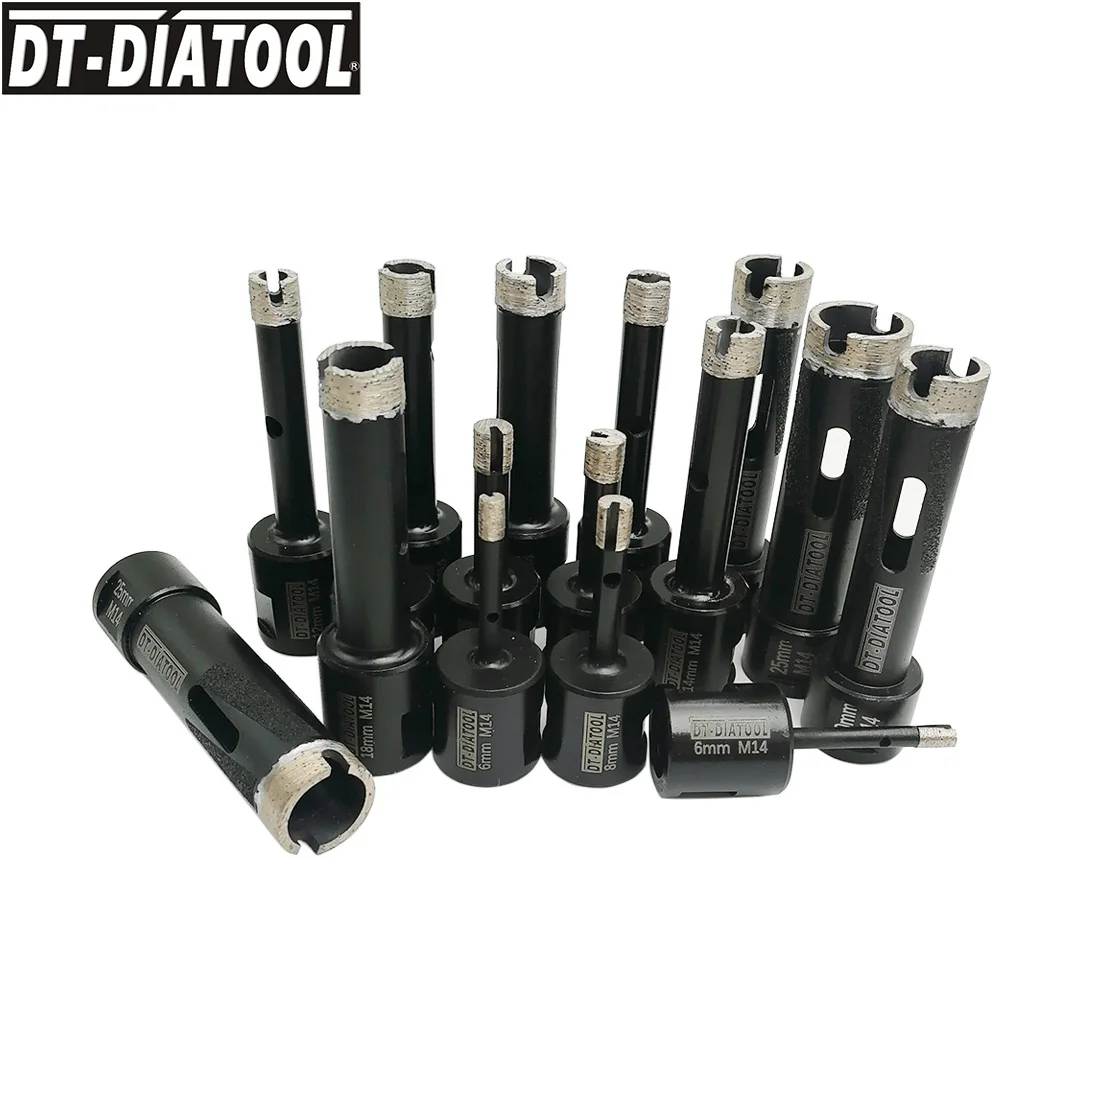 DT-DIATOOL 1pc Wet Welded Diamond Drilling Core Bits wM14 or 5/8-11 thread Drill Bits for Hard Granite Hole Saw Cutter